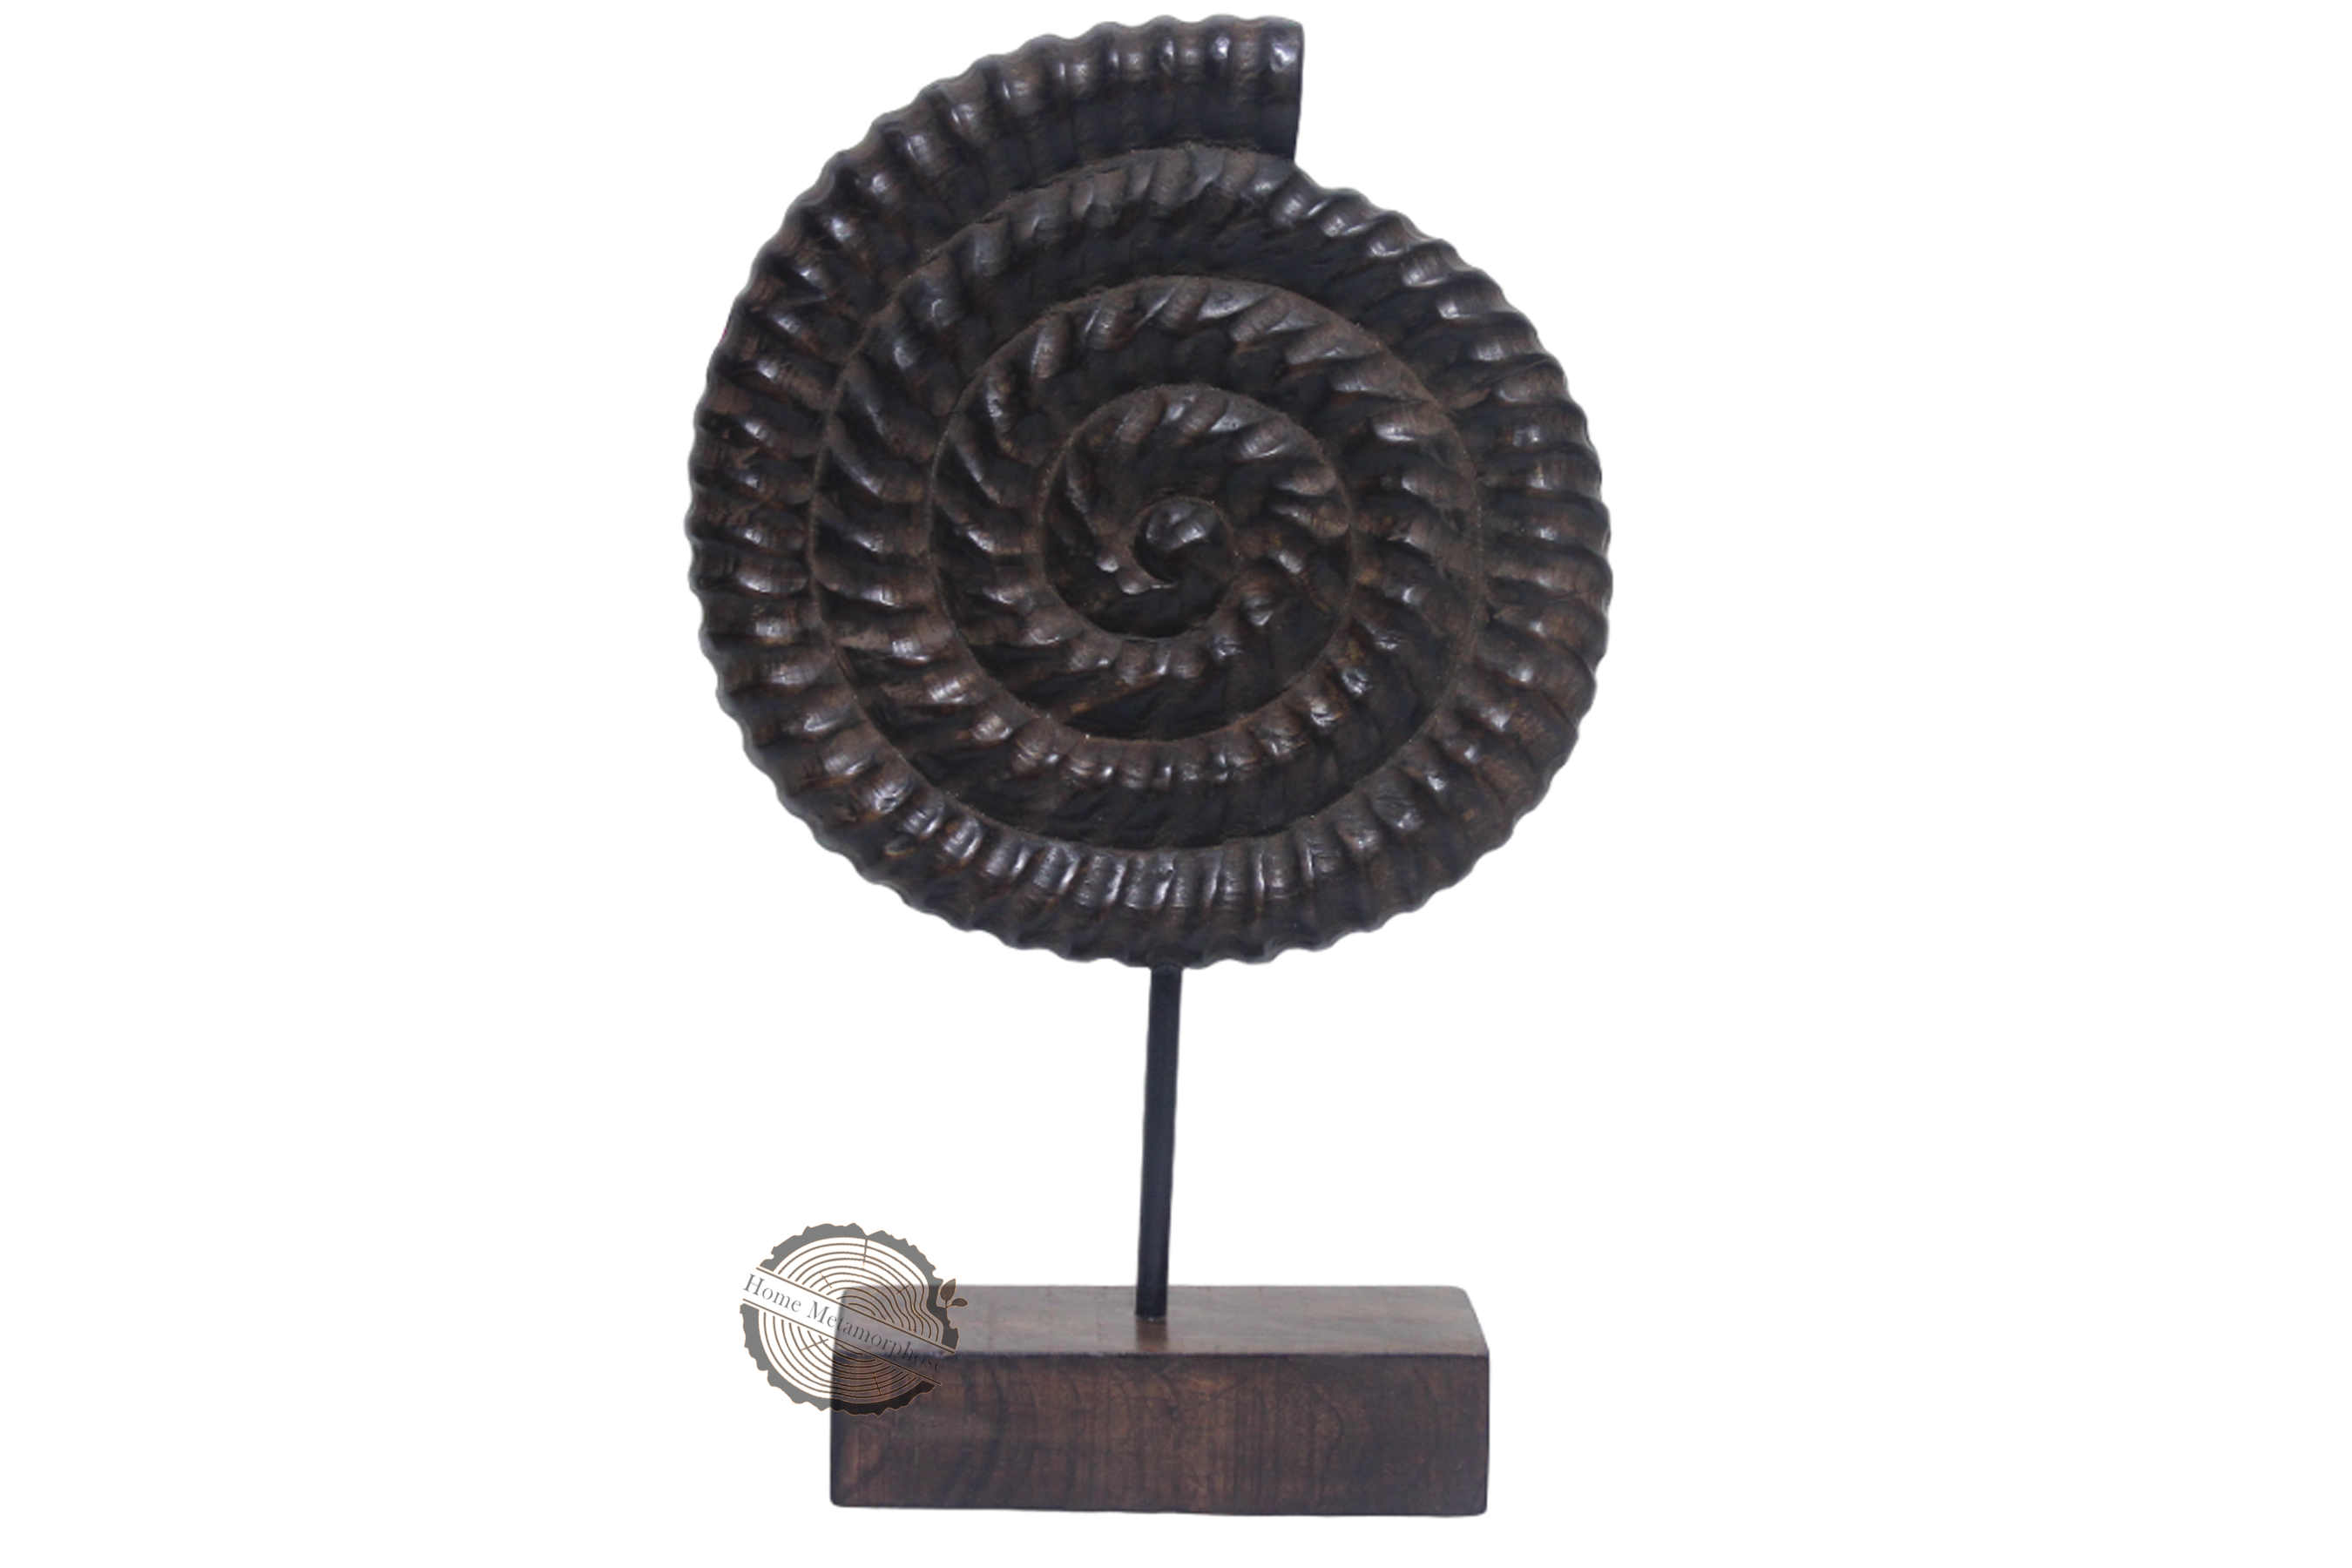 Wooden Fossil home decor, Wooden Ornamental Sculpture on Stand, Home Office Display Decorative Craft Box Decoration, Ammonite Fossil on Stand,Unique Gift, Home Decor, Tabletop Decor, Fossil Decor